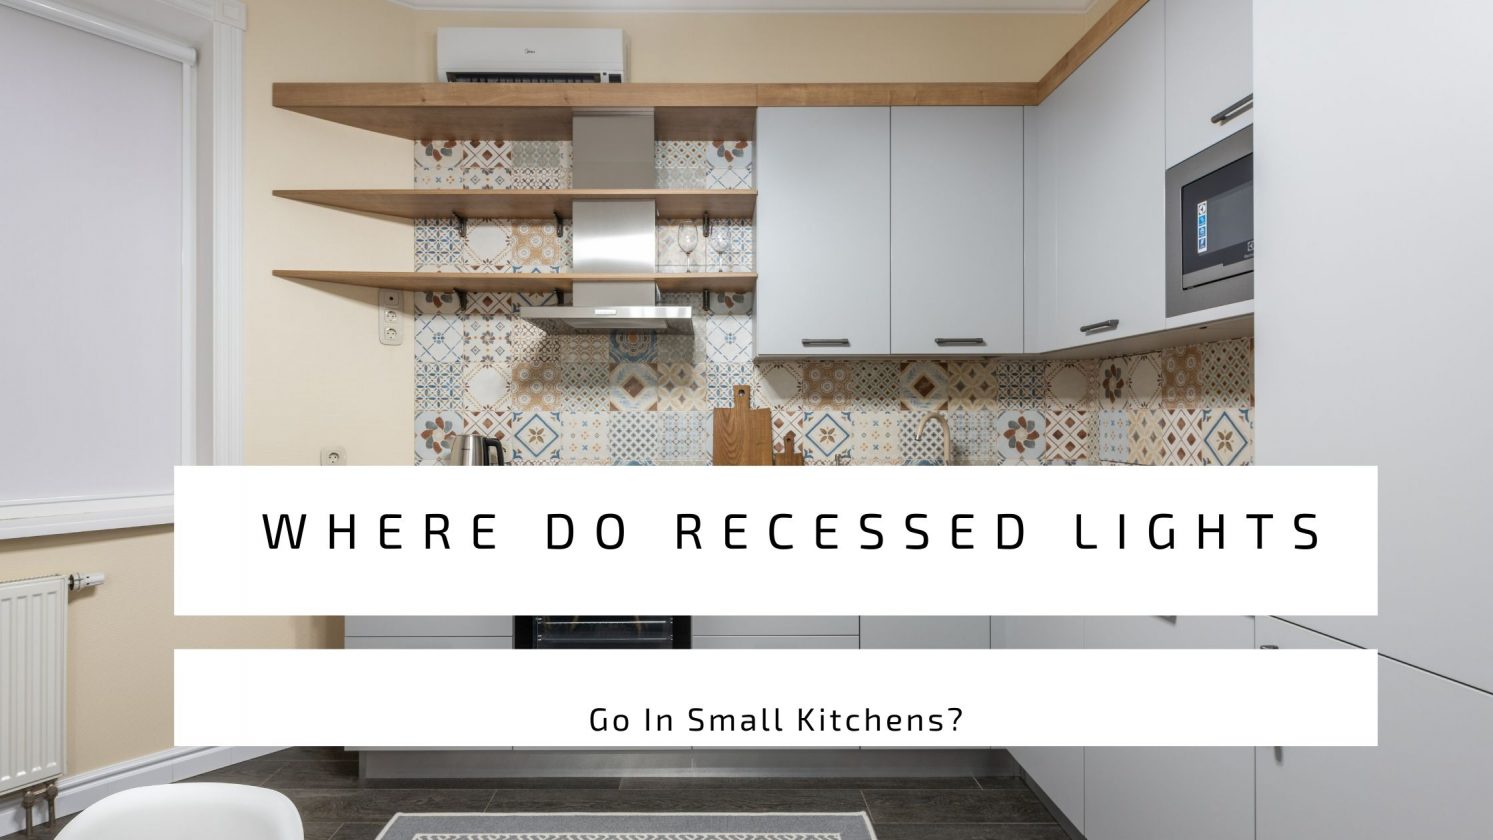 Where Do Recessed Lights Go In Small Kitchens?